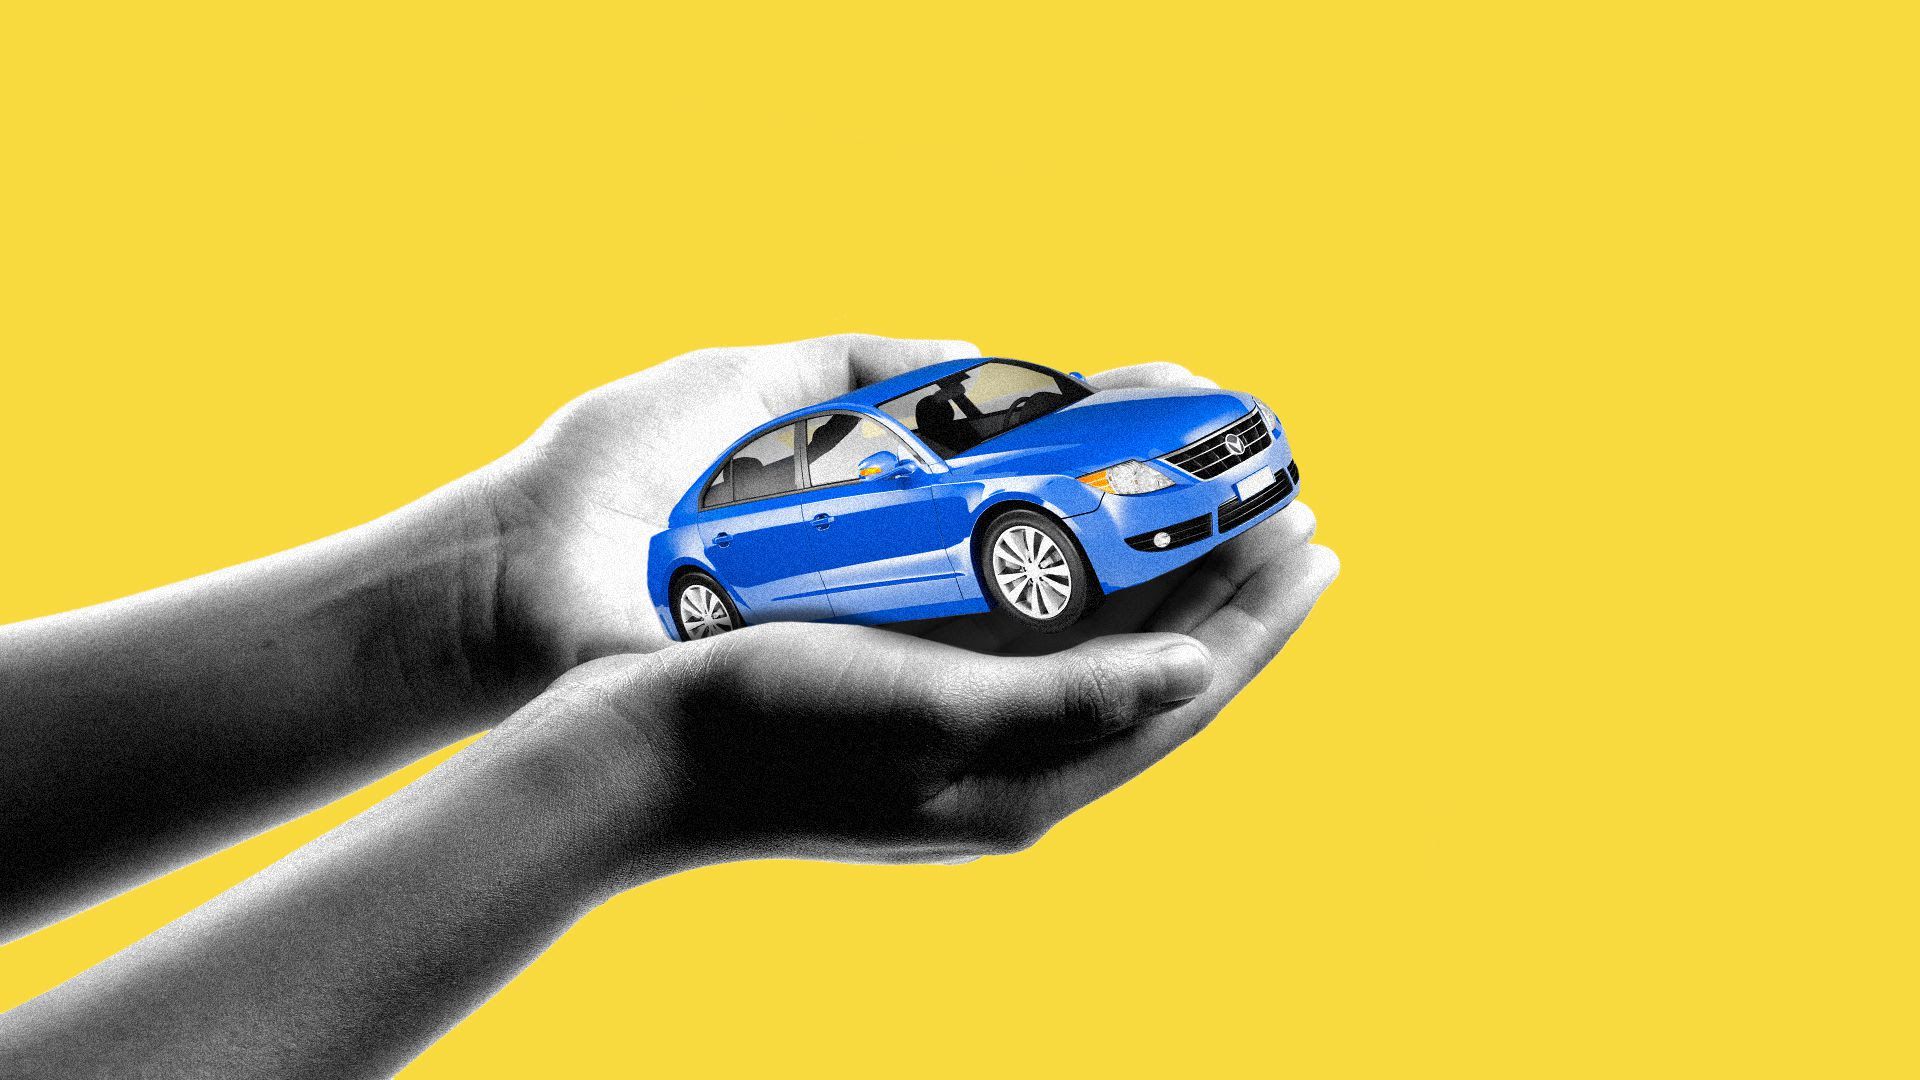 Hands holding up a self-driving car